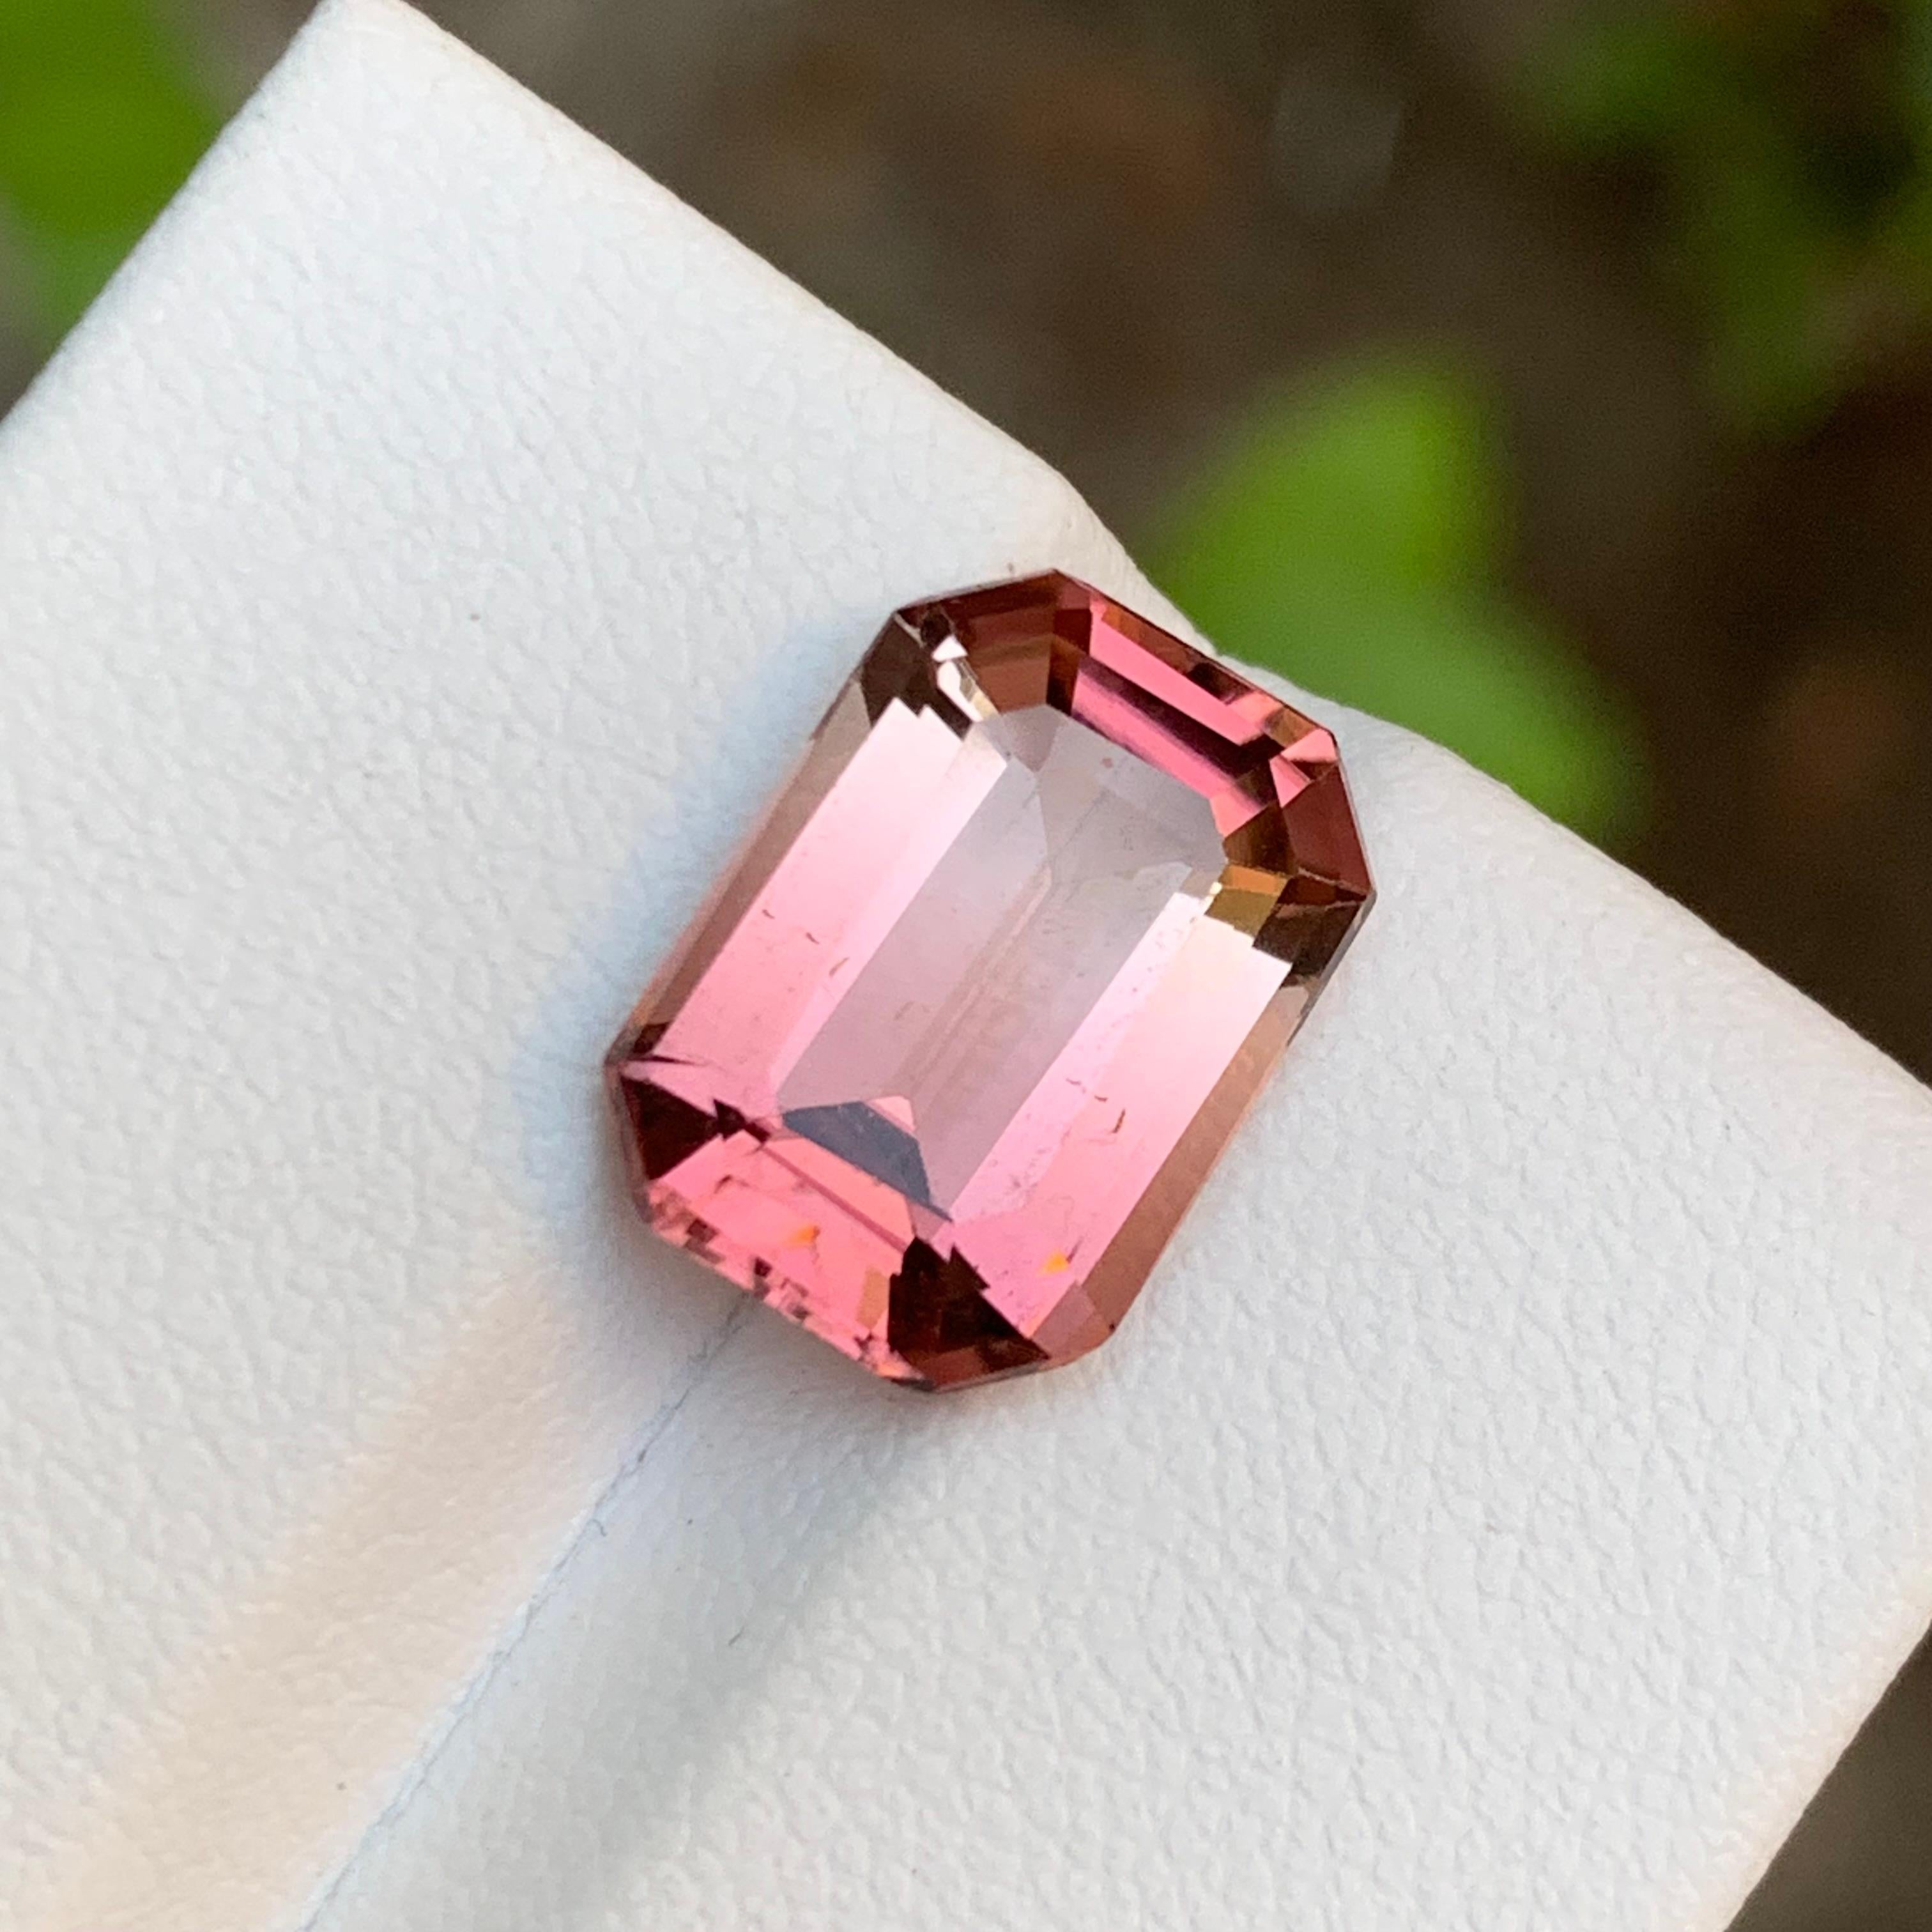 Rare Peachy Pink Bicolor Natural Tourmaline Gemstone, 4.80 Ct Emerald Cut-Ring  For Sale 4